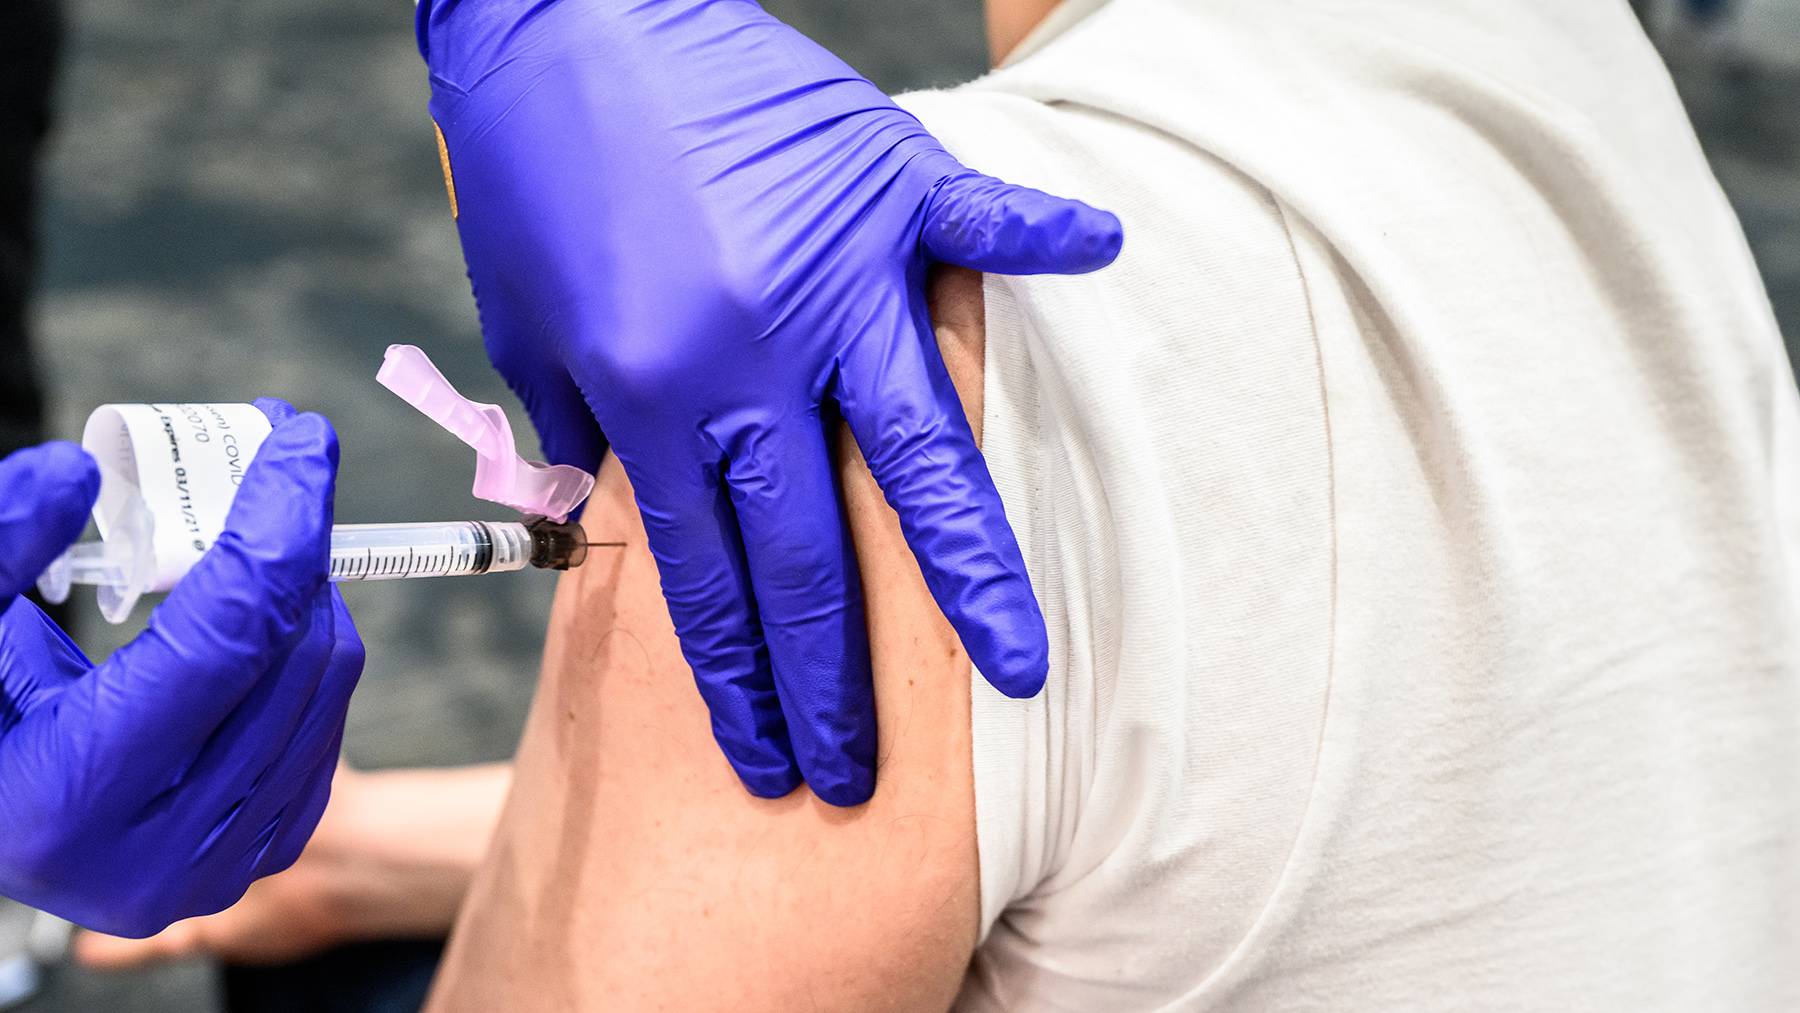 A student receives a COVID-19 vaccine shot at the EUC vaccination clinic.